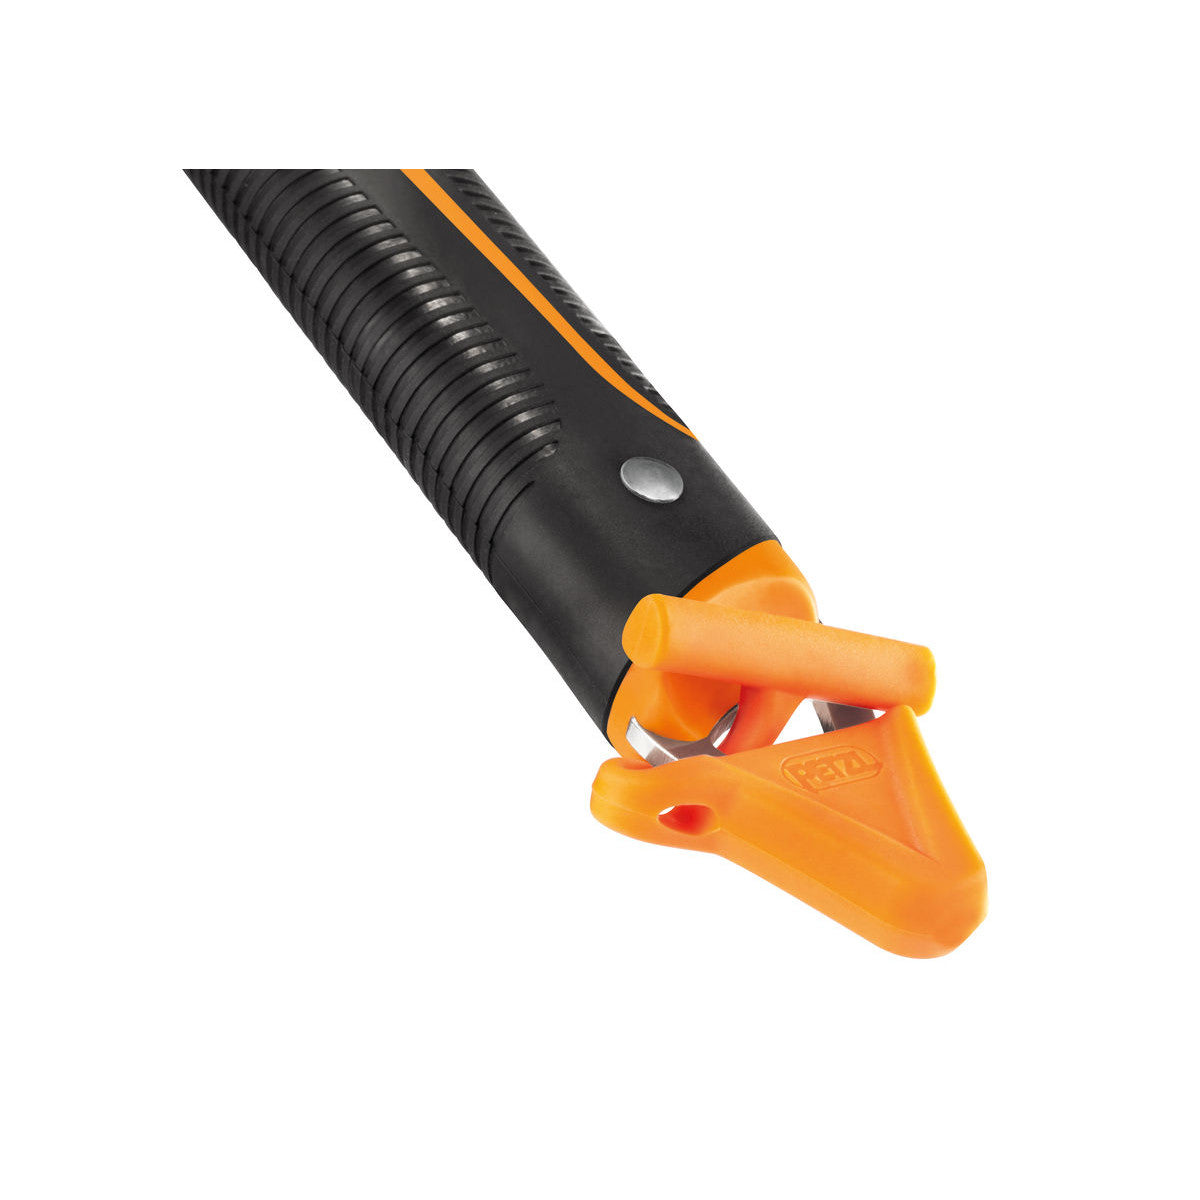 Petzl Spike Protector shown on black spike in orange colour